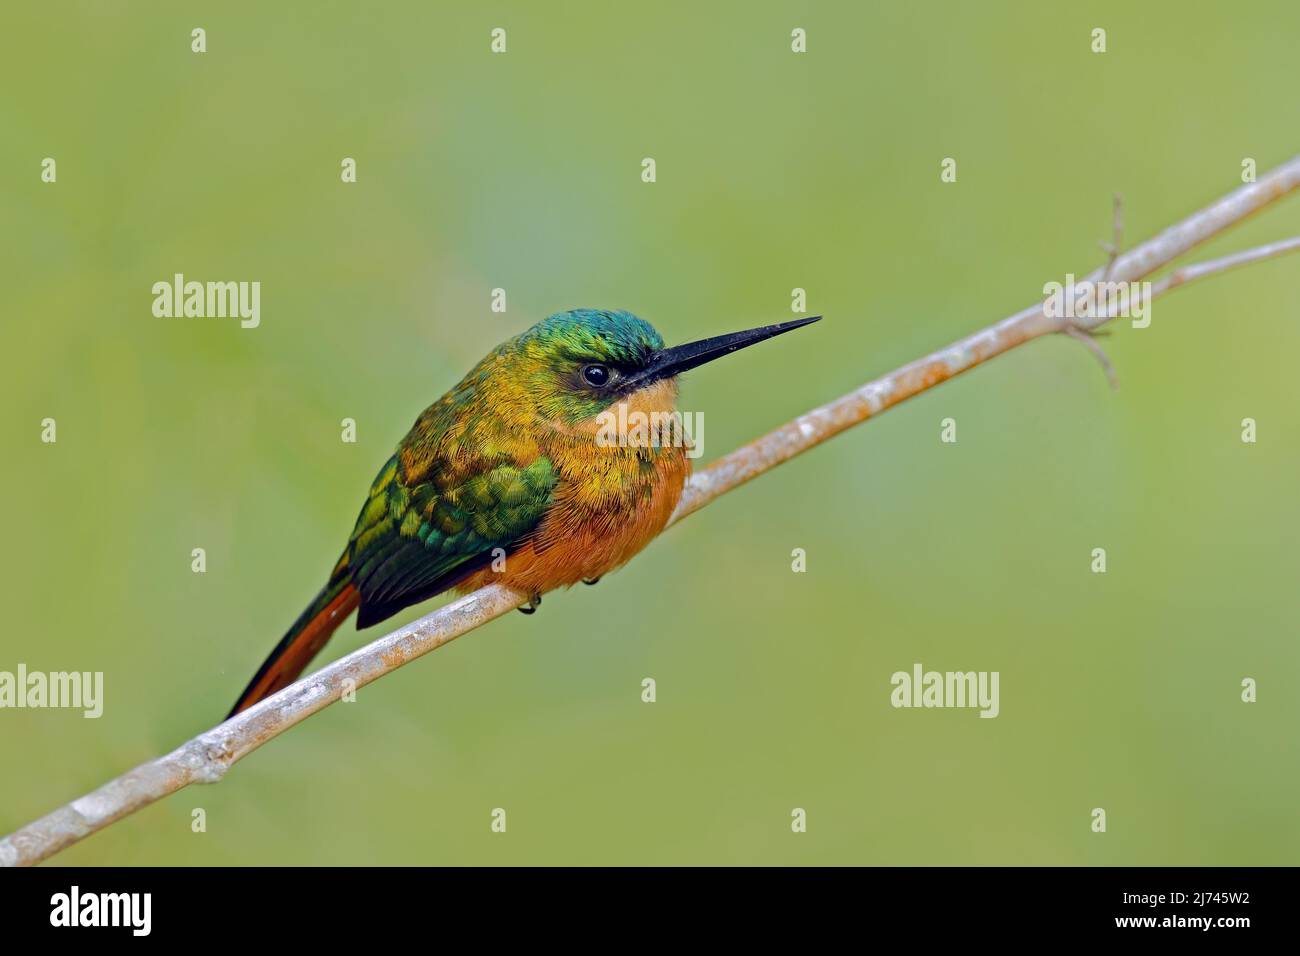 Rufous-tailed Jacamar, Galbula ruficauda, exotic bird sitting on the branch with clear green background, Trinidad and Tobago Stock Photo